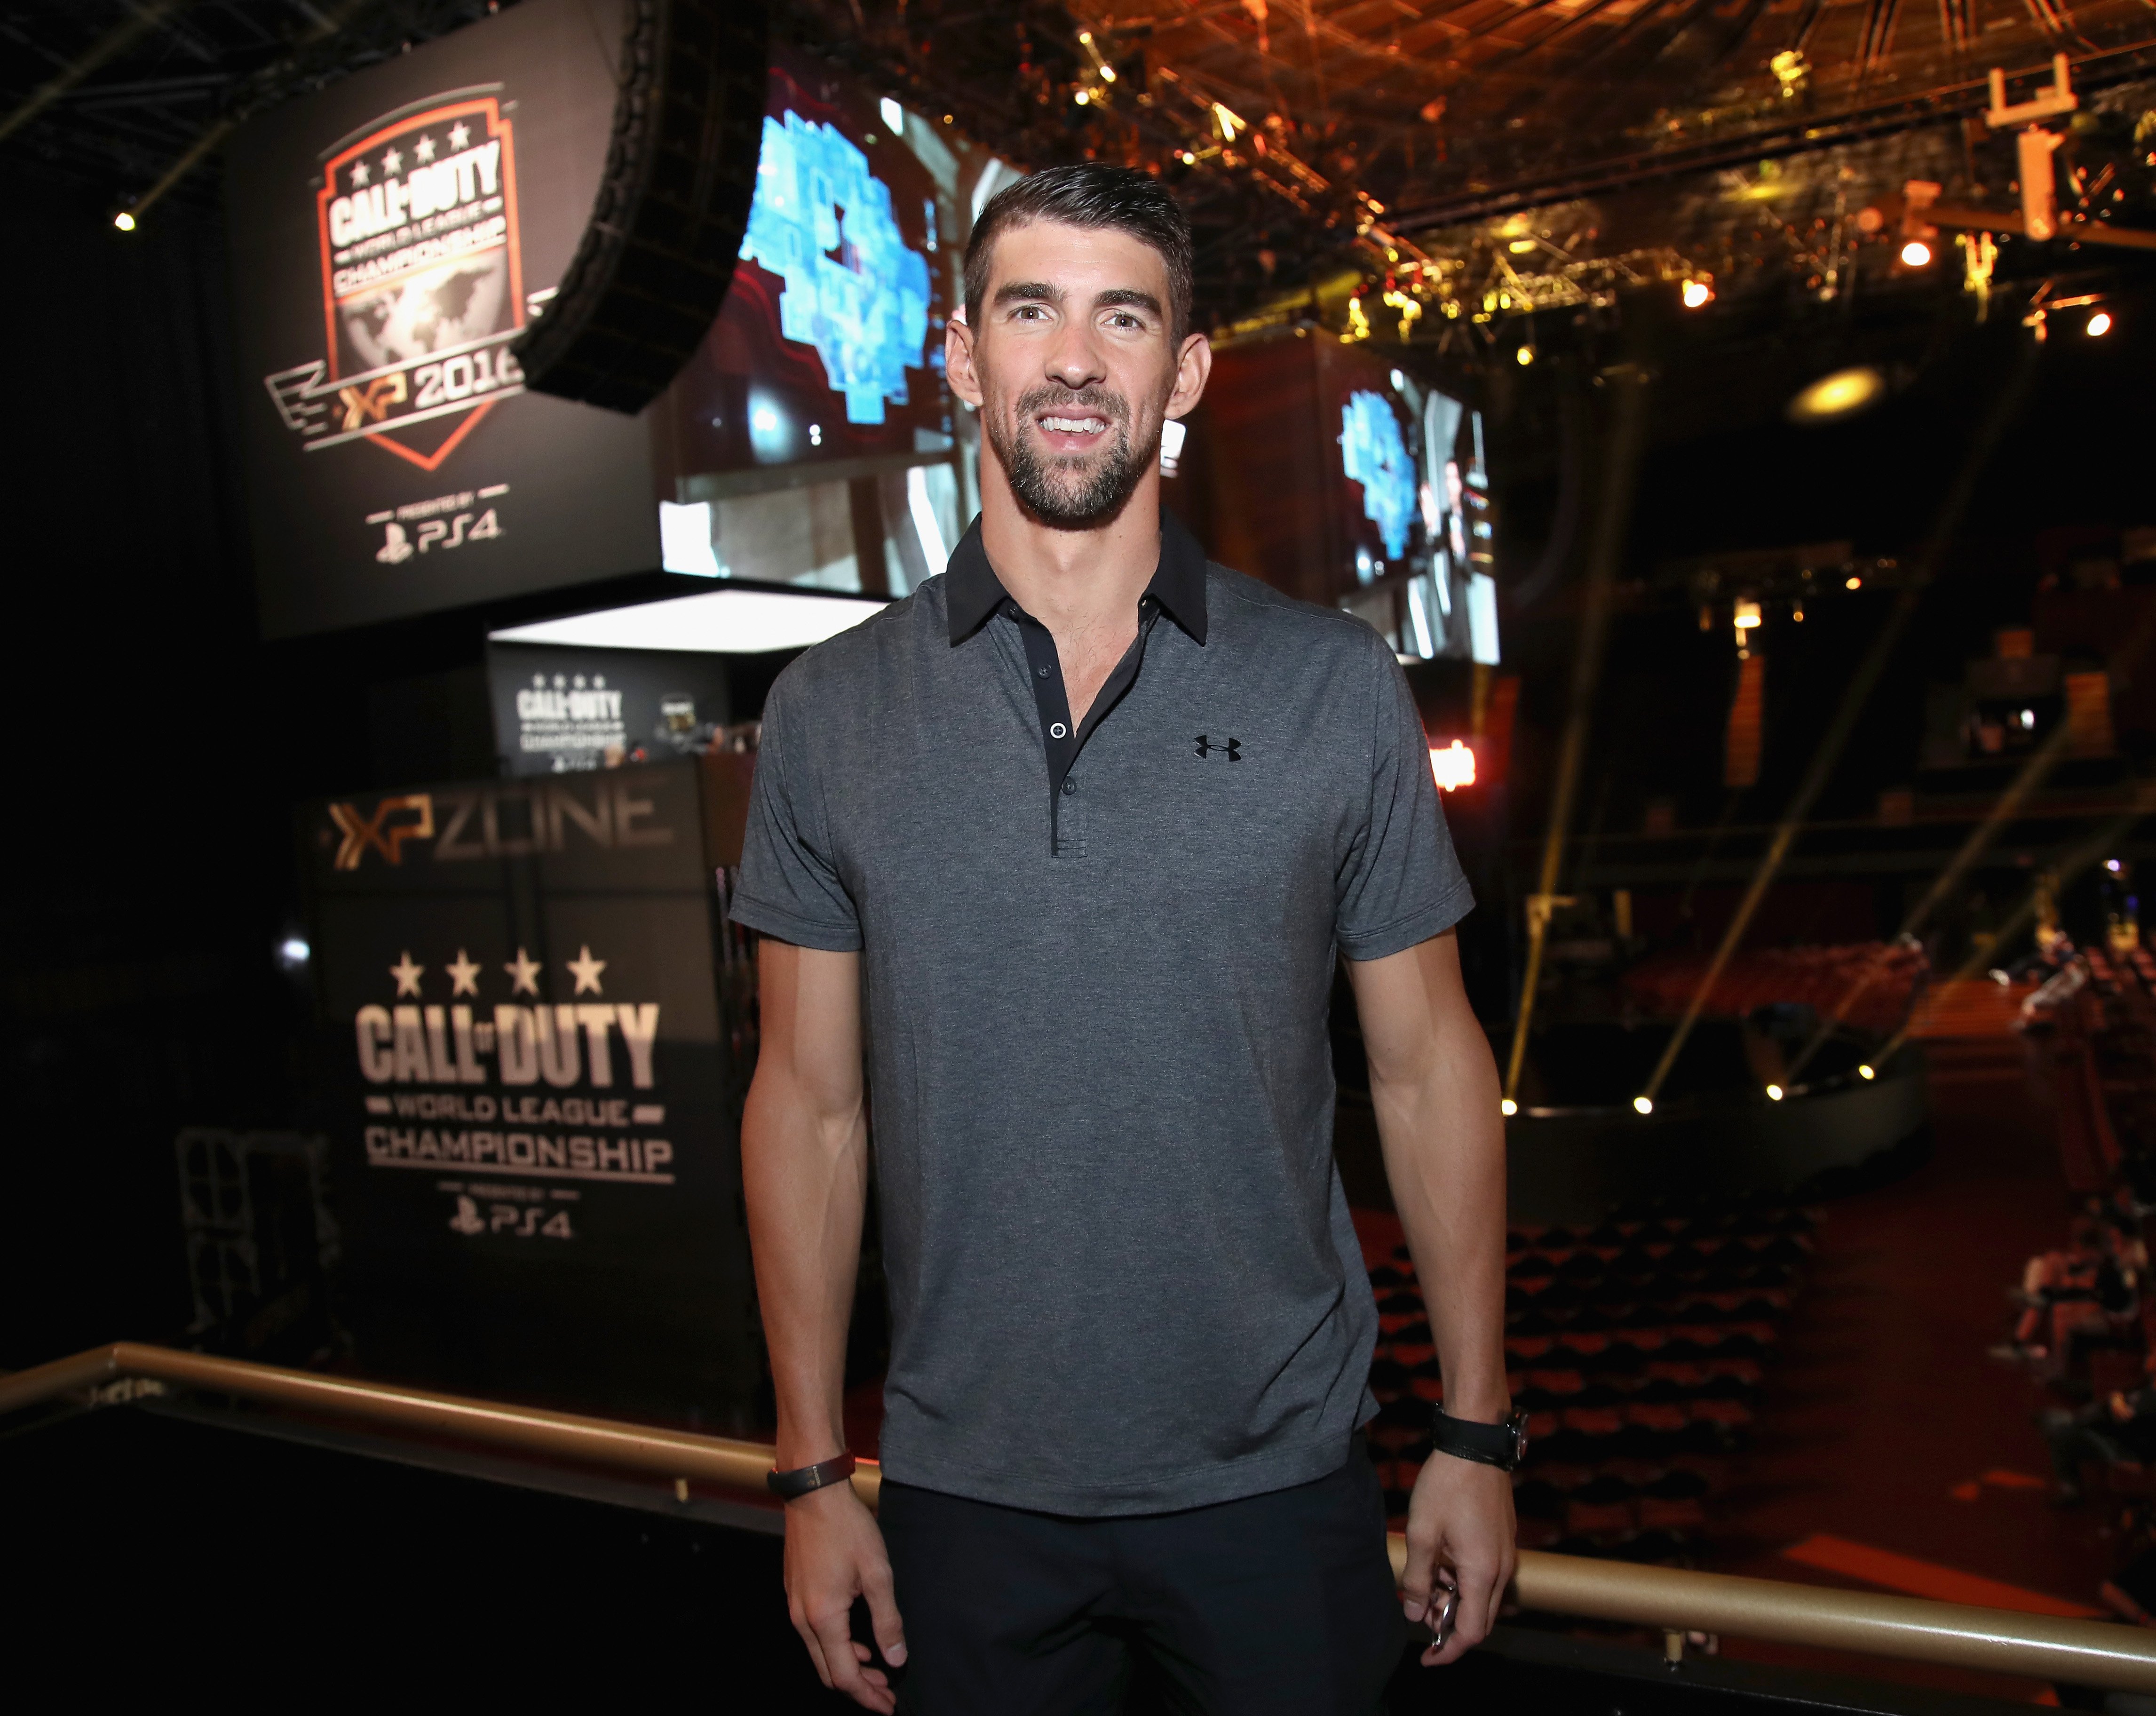 Michael Phelps attends The Ultimate Fan Experience, Call Of Duty XP 2016 presented by Activision at The Forum on September 2, 2016 in Inglewood, California. | Photo: GettyImages